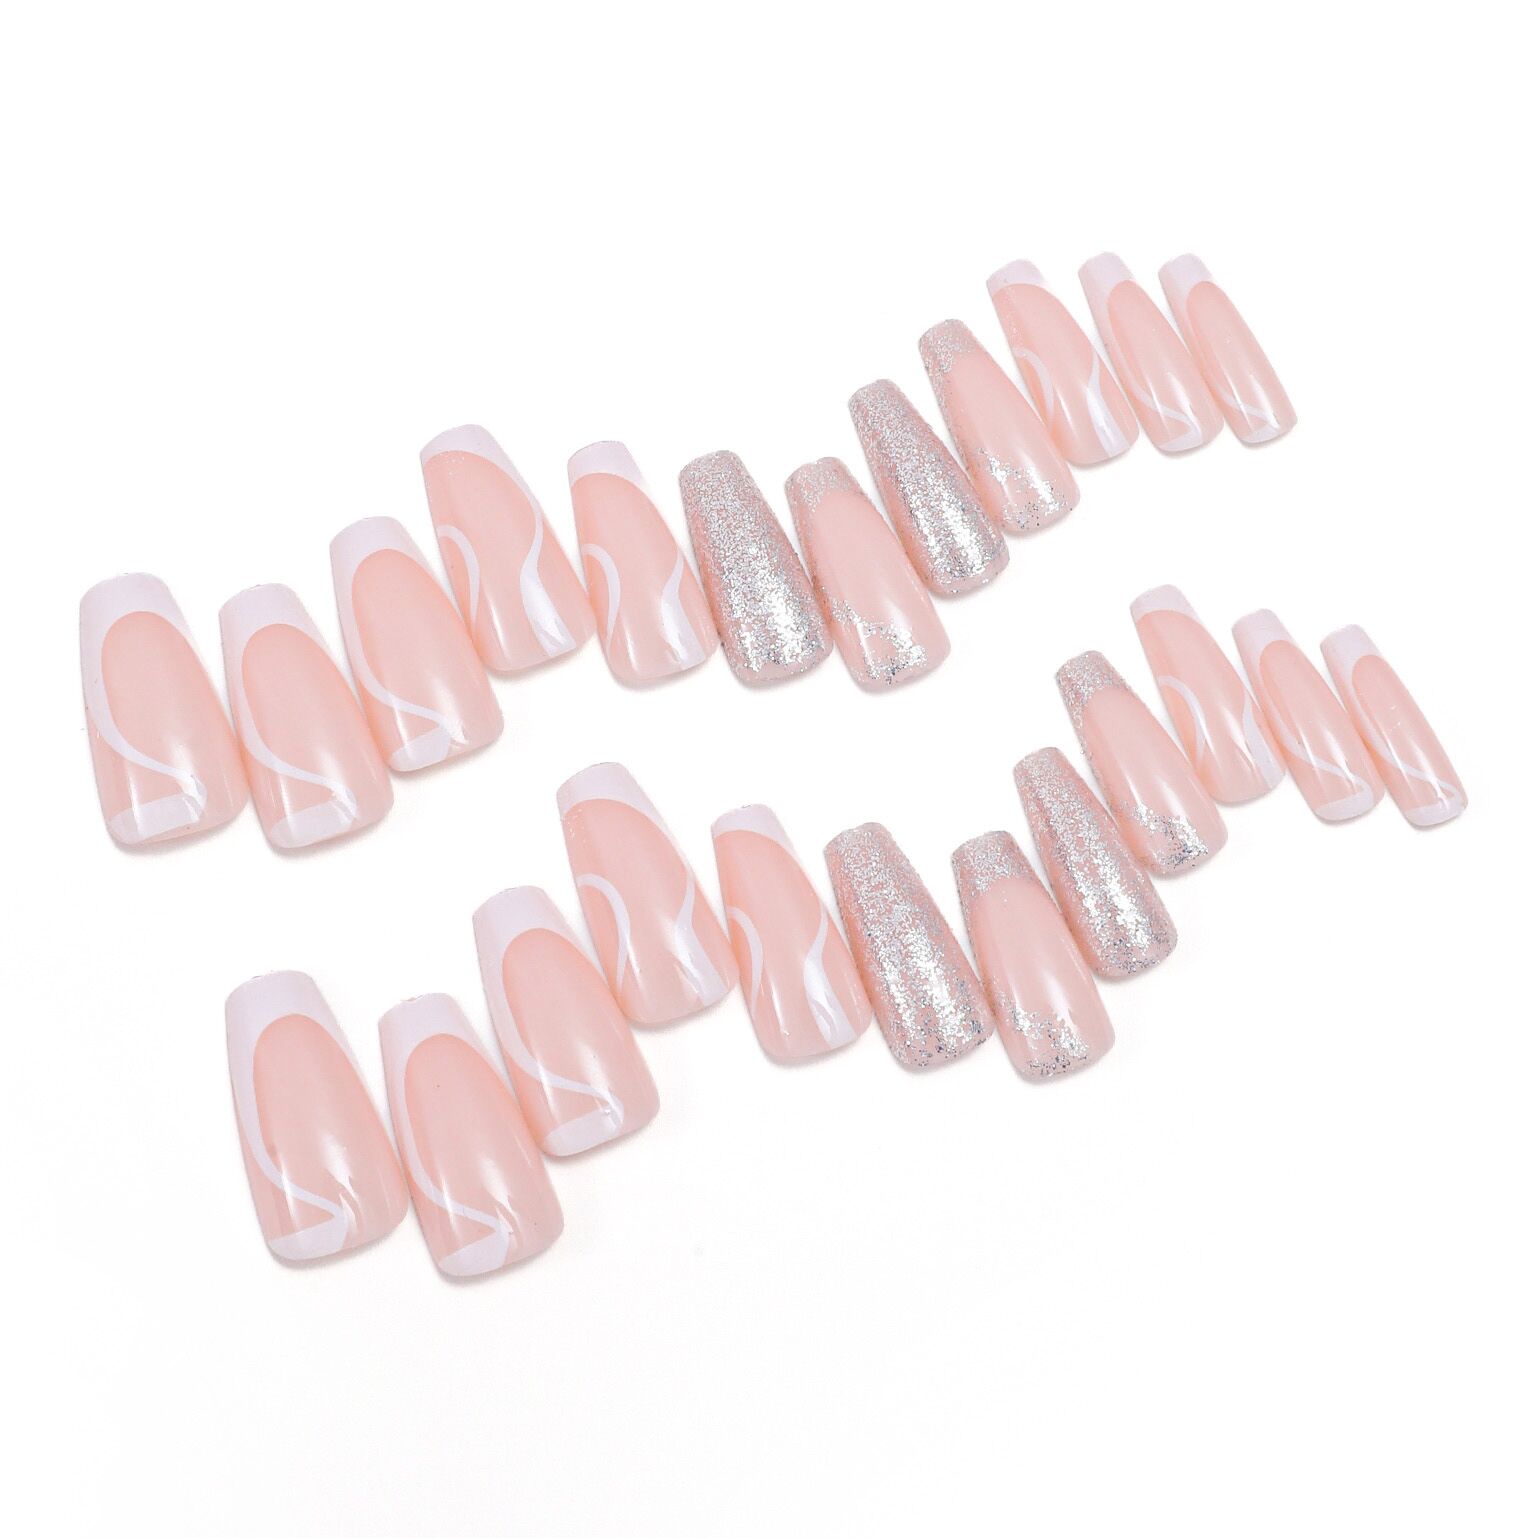 24-Piece Coffin Press On Nails in Light Pink, White, and Silver with Glitter French Tip Design